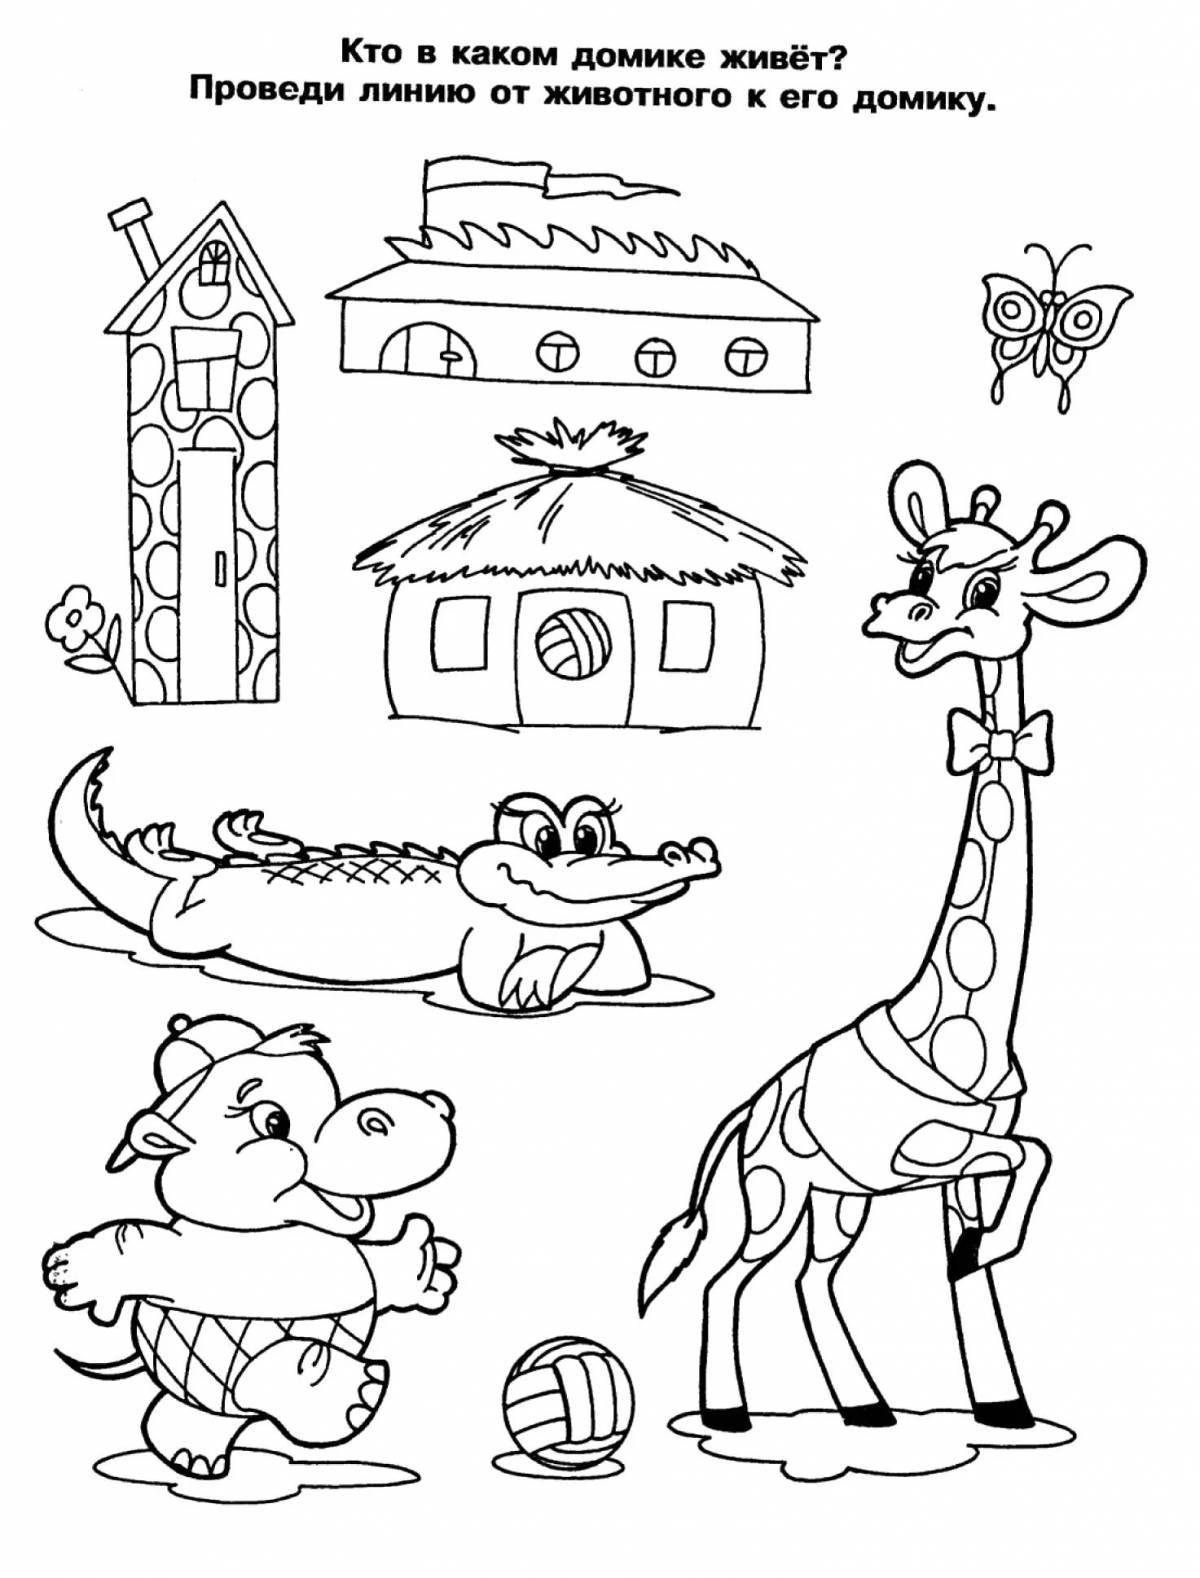 Interactive coloring book for children 4 years old